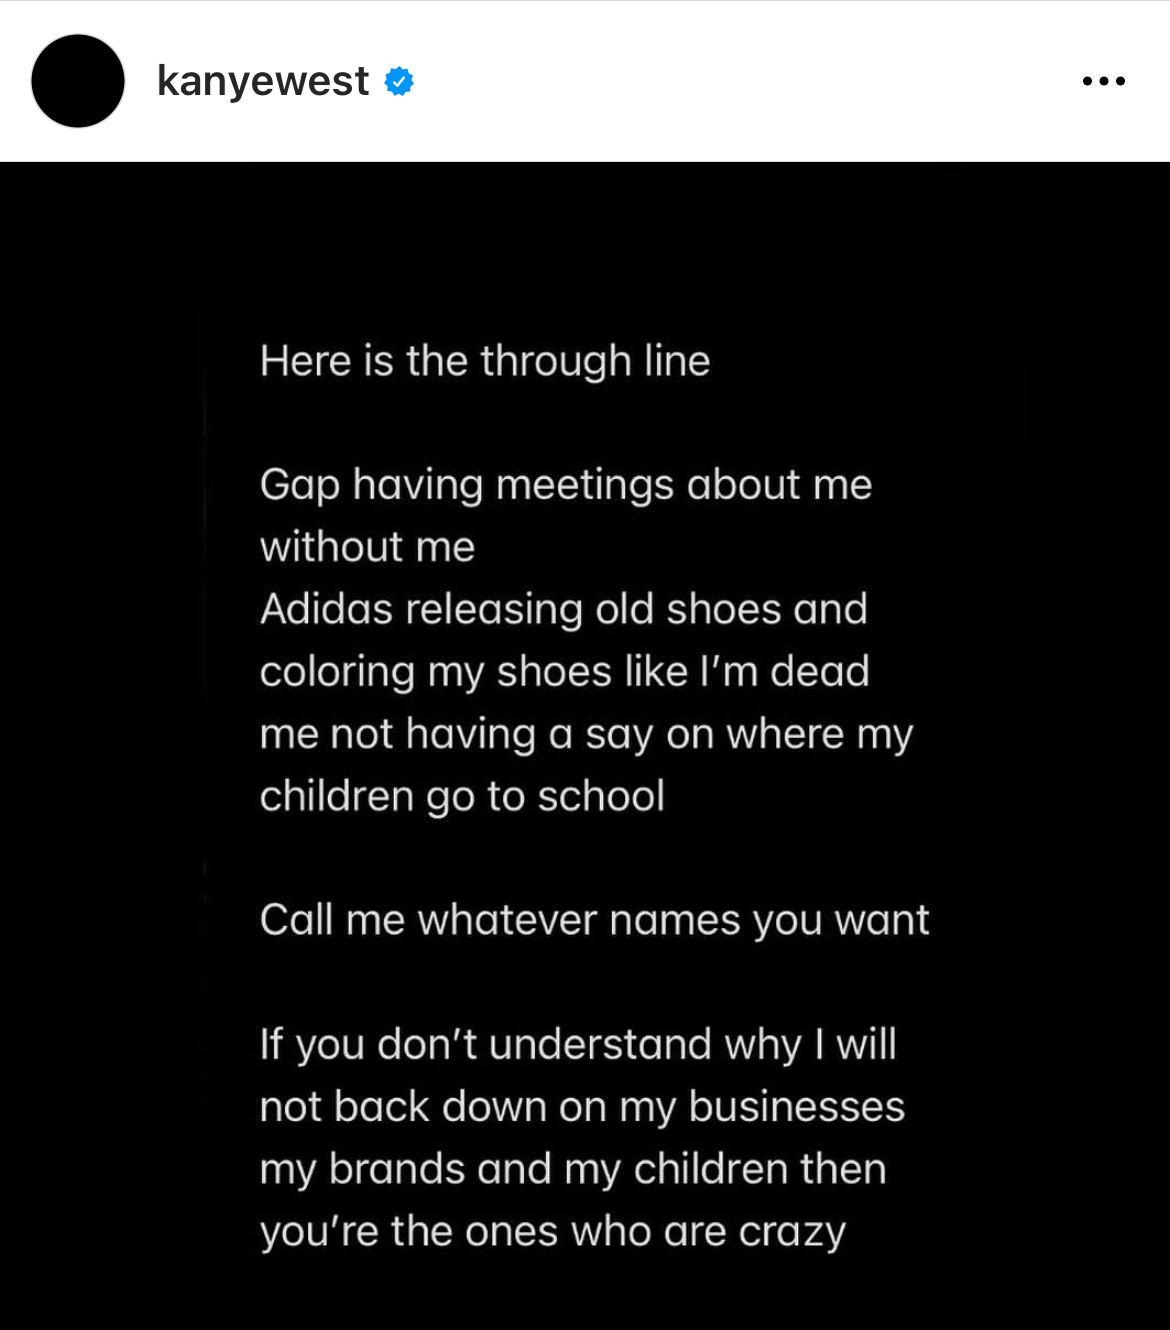 Kanye West Instagram Meltdown - screenshot - kanyewest Here is the through line Gap having meetings about me without me Adidas releasing old shoes and coloring my shoes I'm dead me not having a say on where my children go to school Call me whatever names 